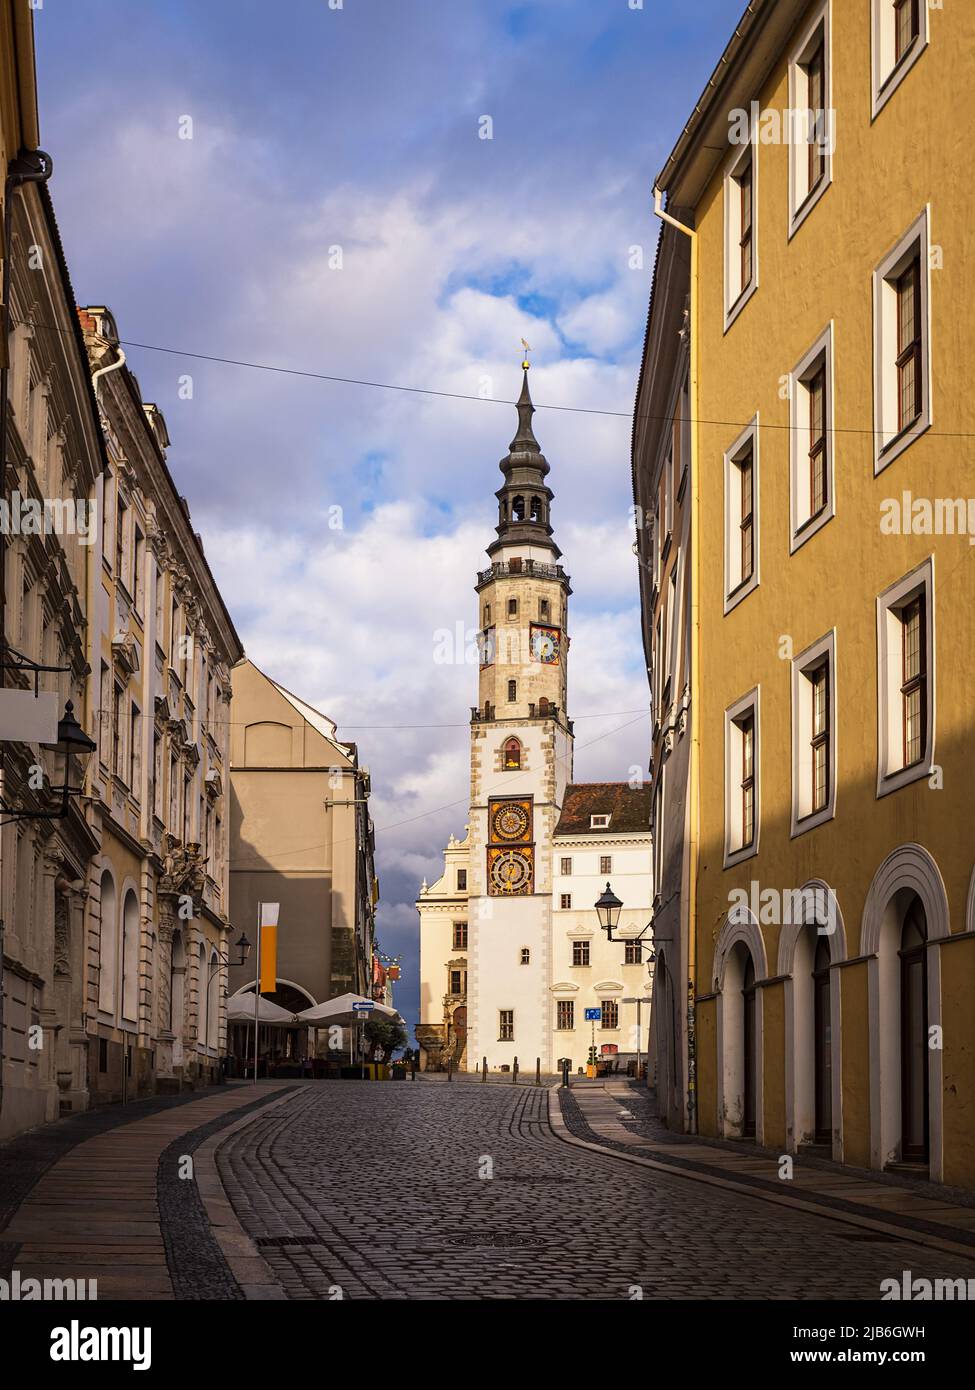 View to the tower of the city hall in Goerlitz, Germany. Stock Photo